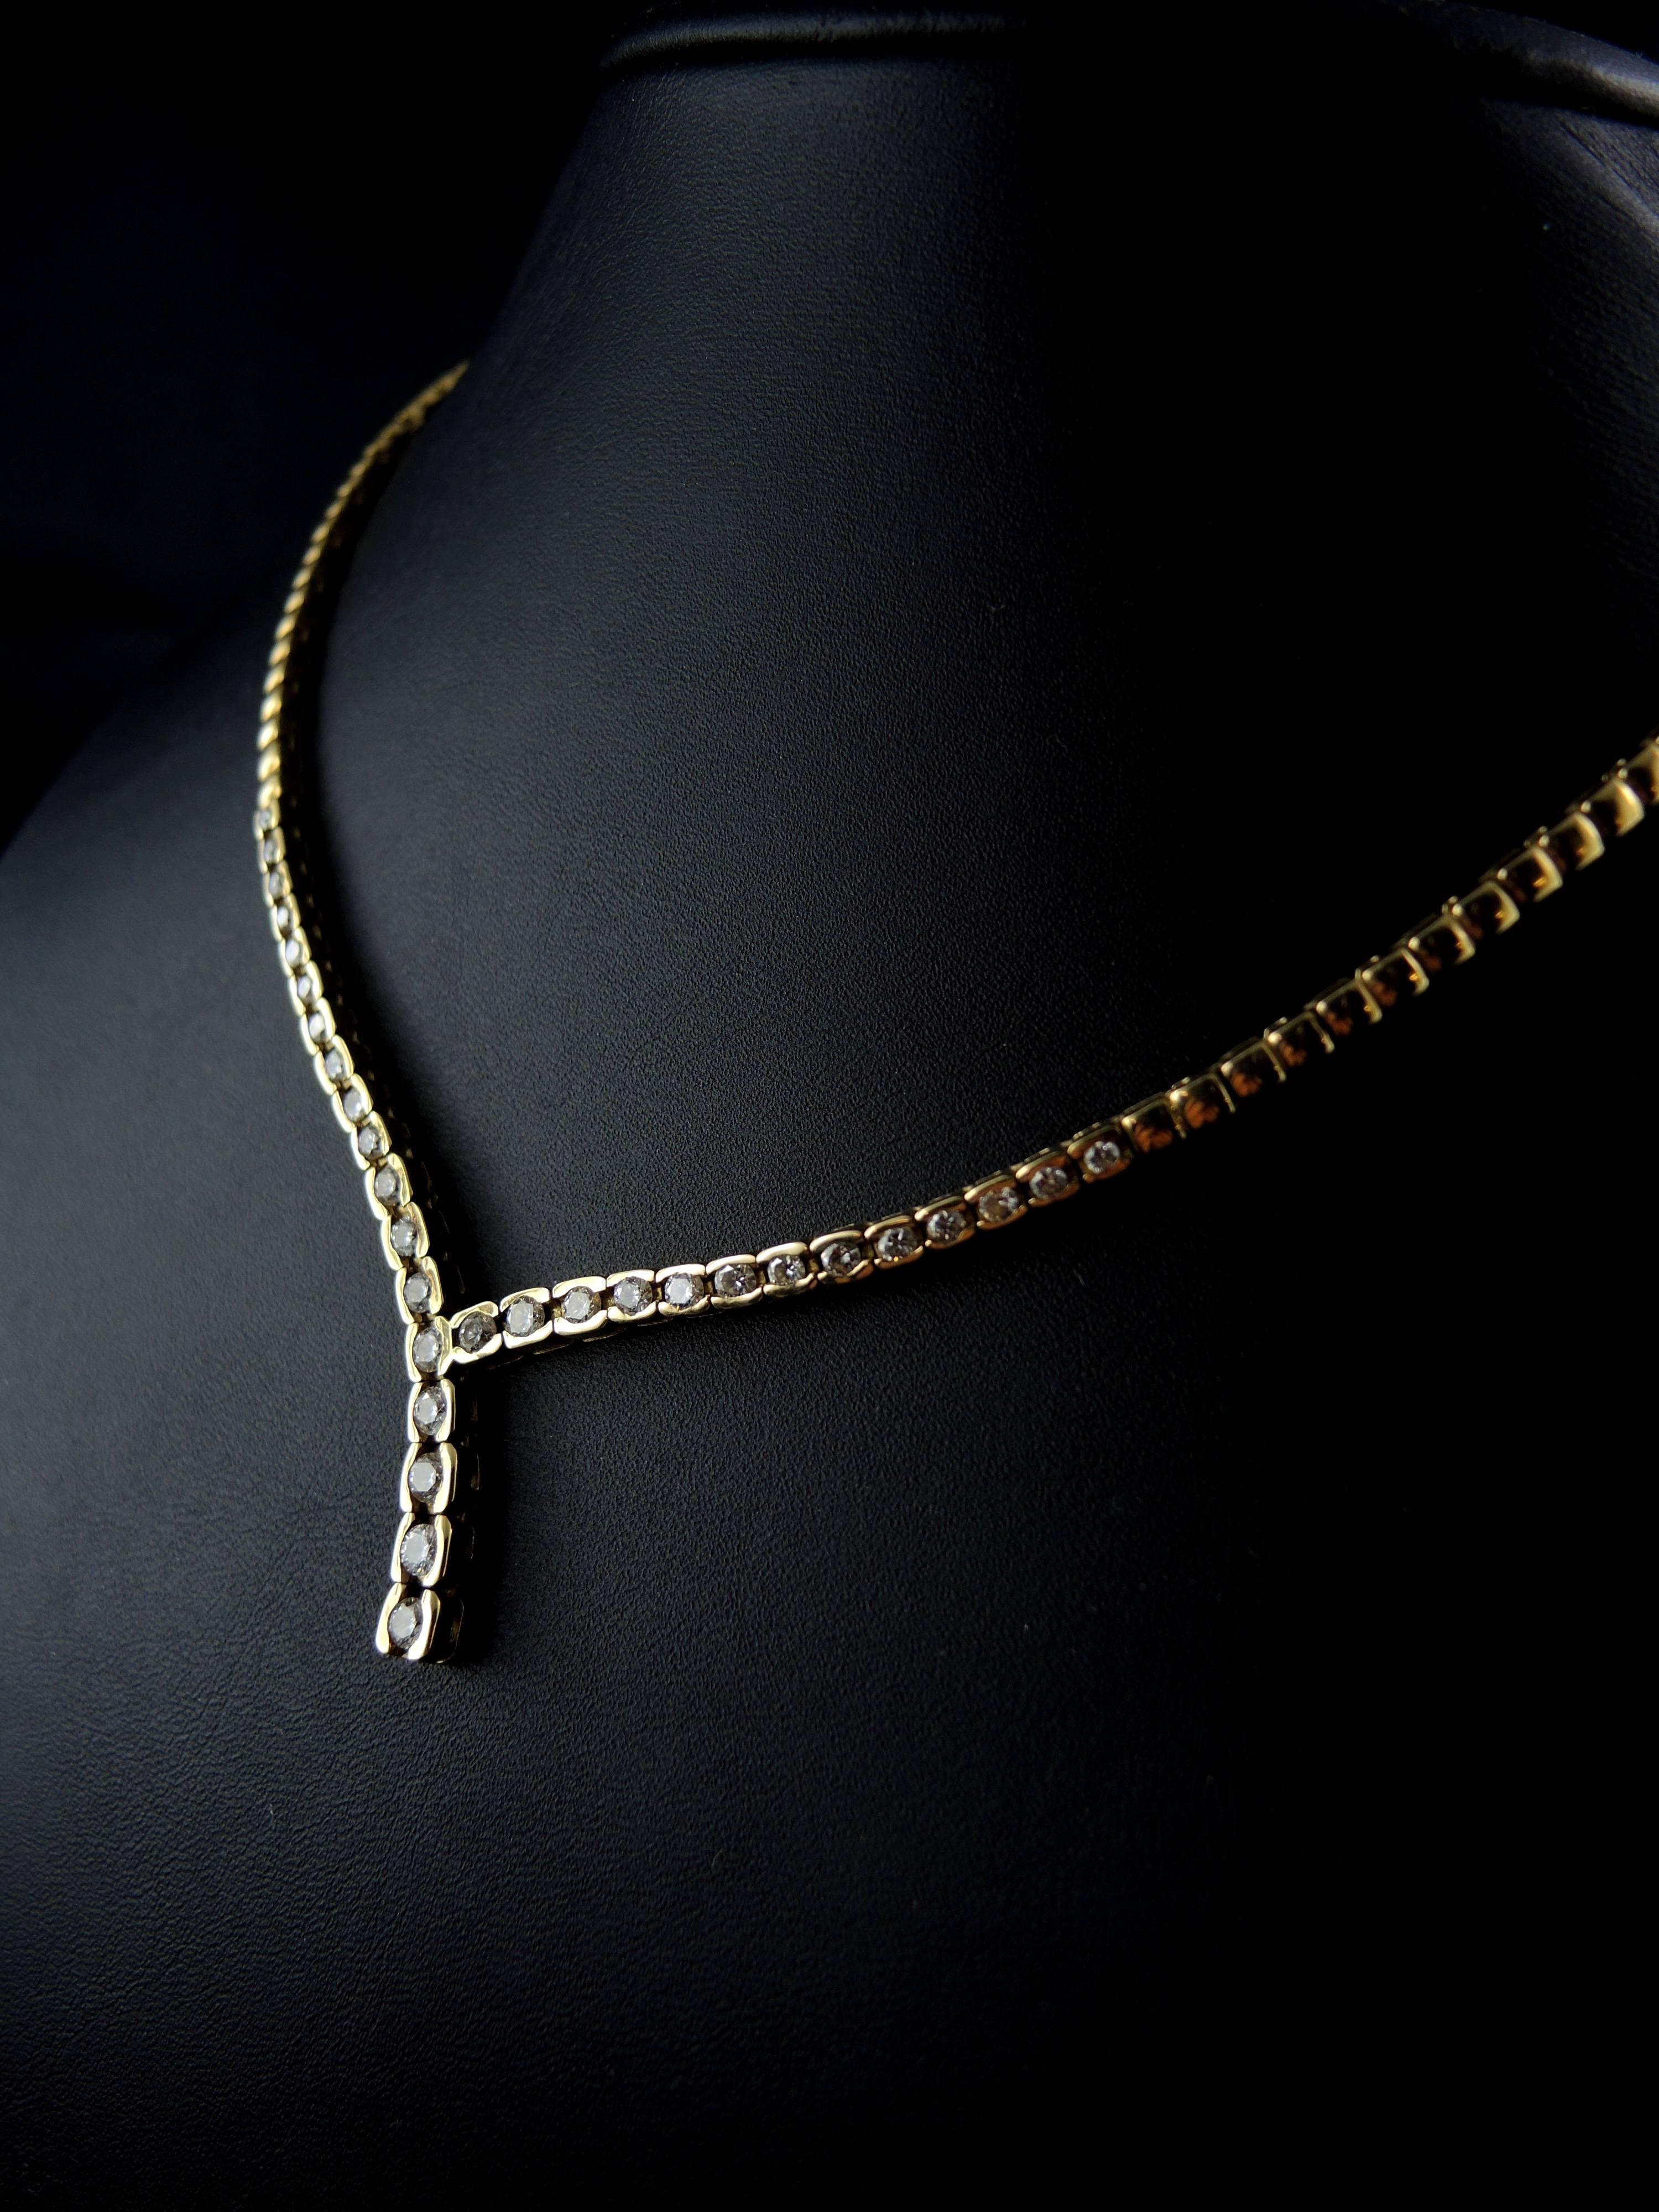 Women's or Men's Modern Diamonds and Gold Necklace